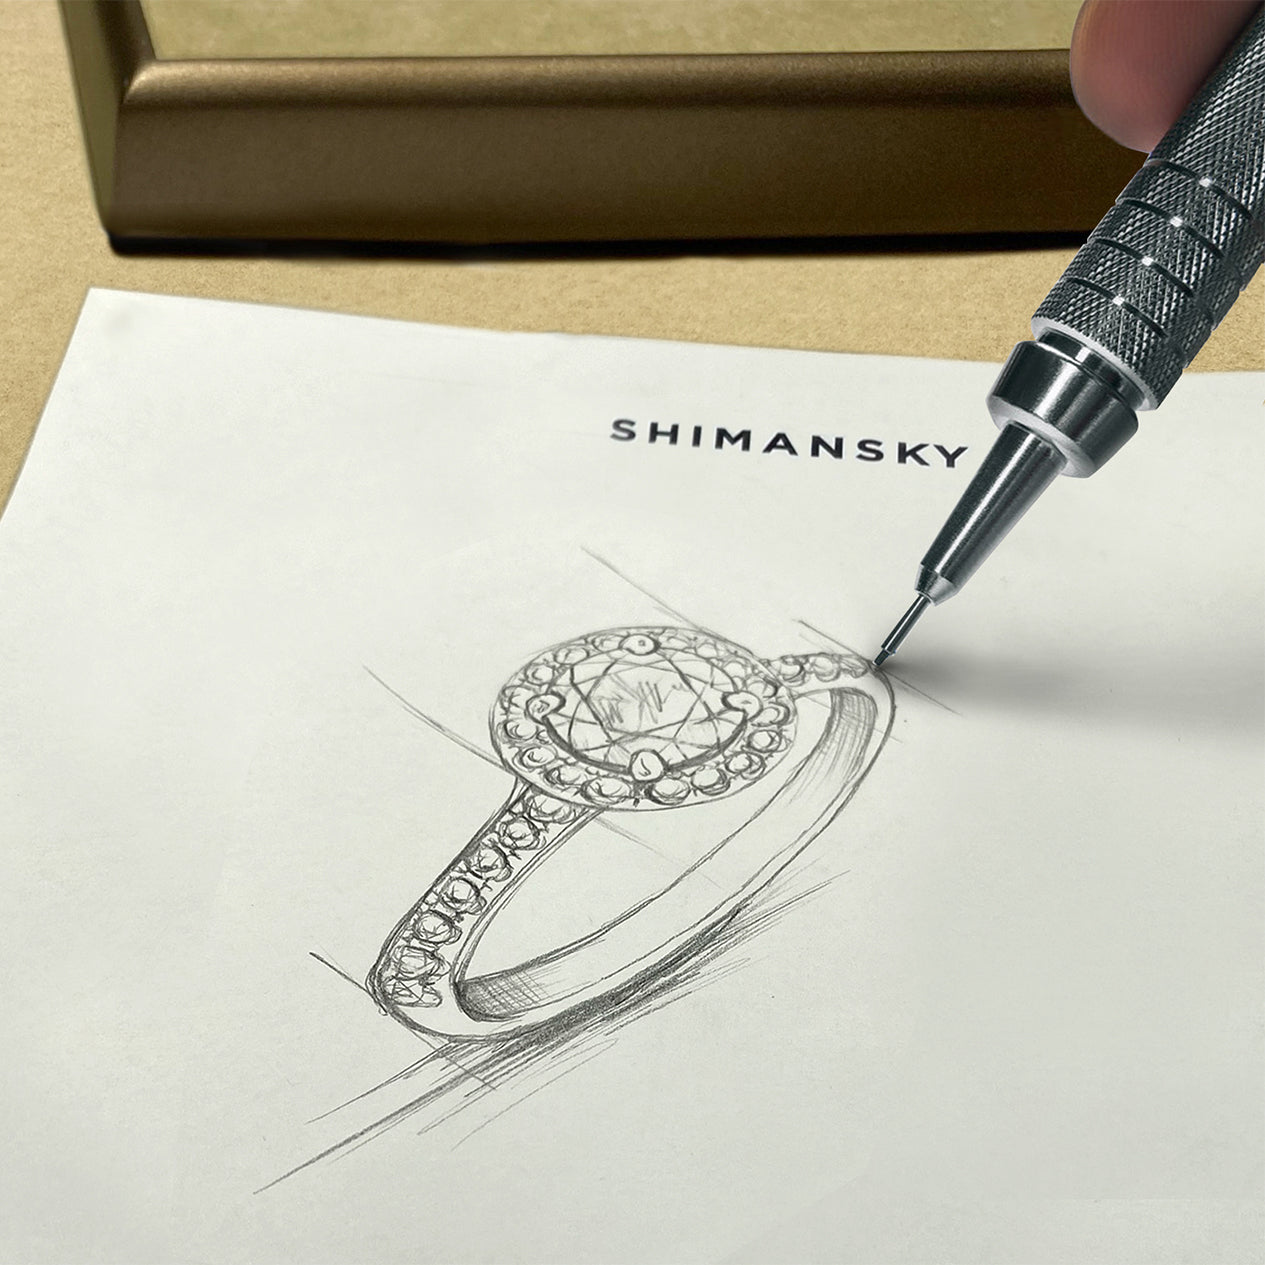 Shimansky Jewellery Designer drawing a new ring concept 